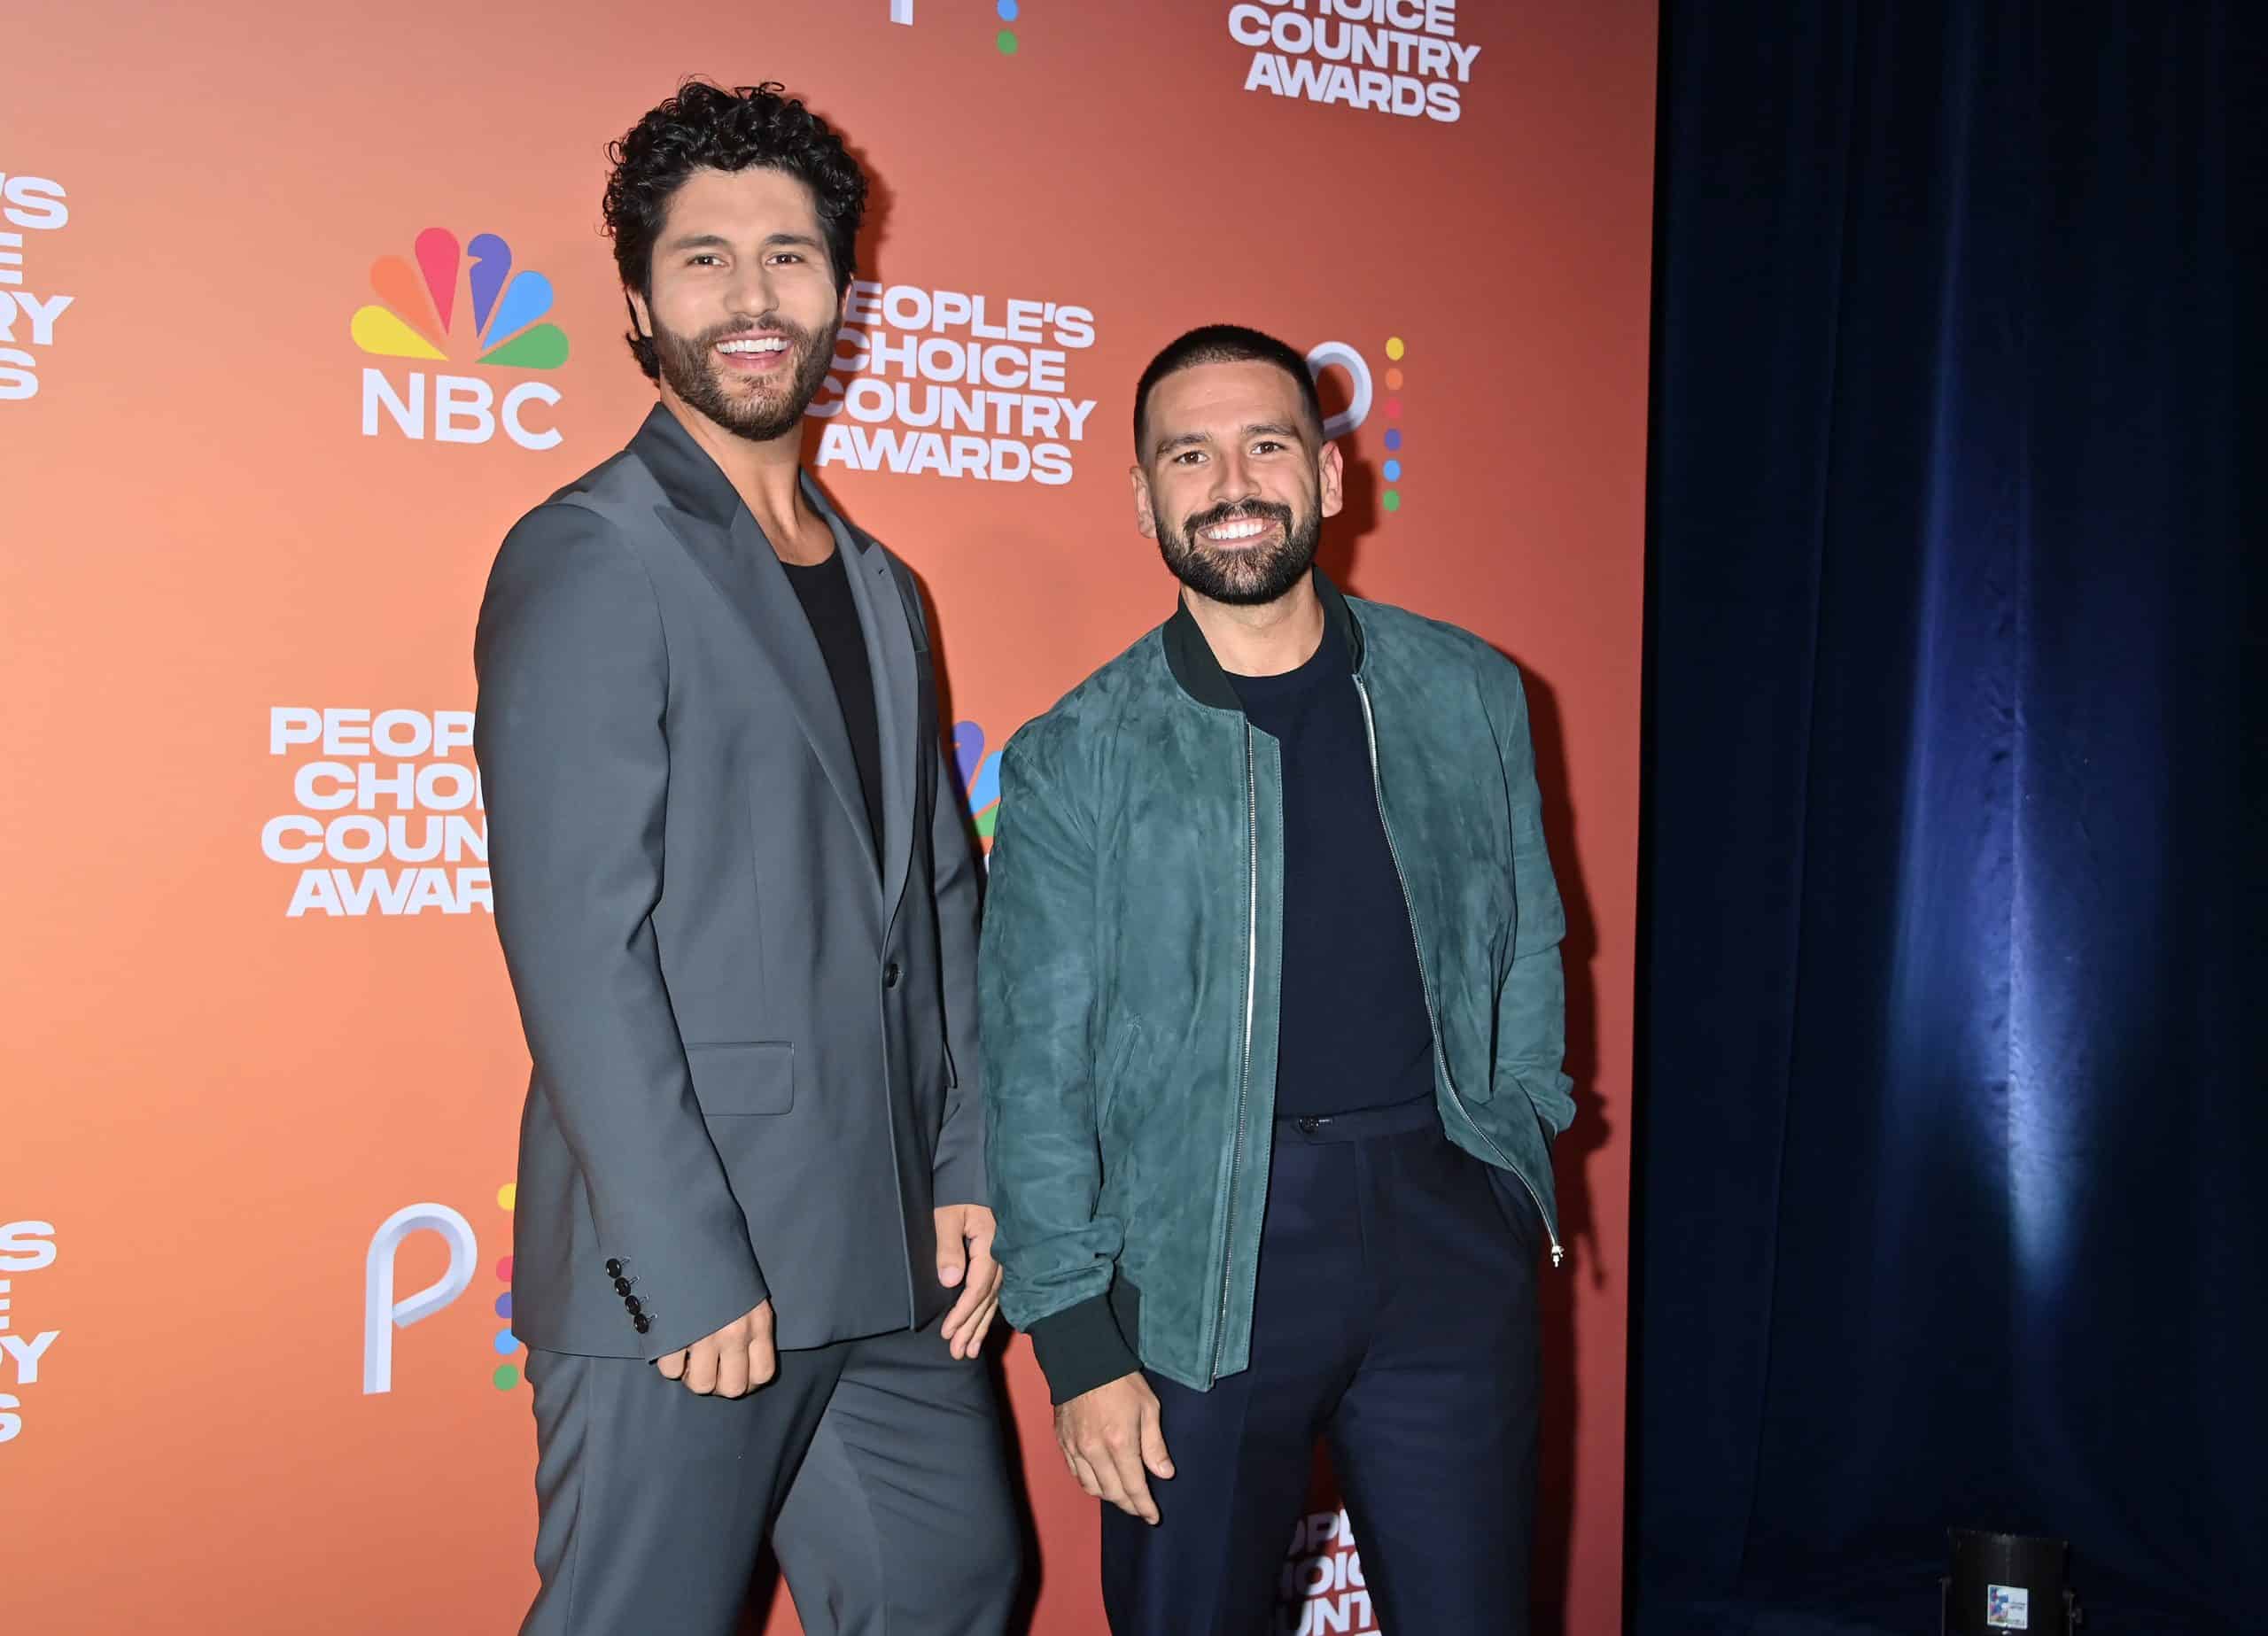 Dan + Shay at the 2023 People's Choice Country Awards held at The Grand Ole Opry House on September 28, 2023 in Nashville, Tennessee. (Photo by Tammie Arroyo/Variety via Getty Images)